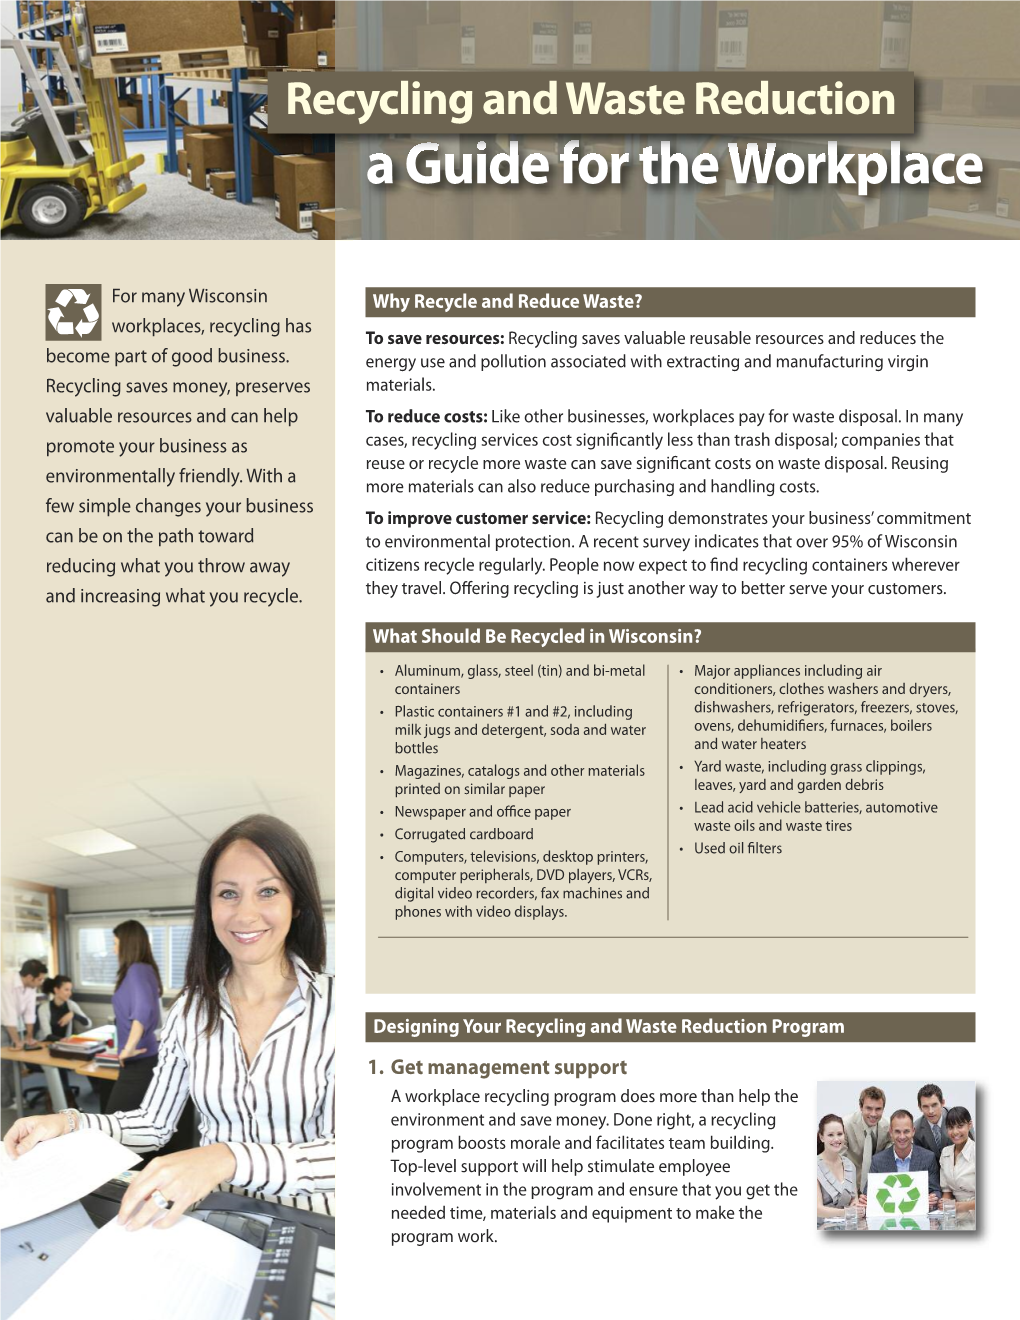 Recycling and Waste Reduction: a Guide for the Workplace